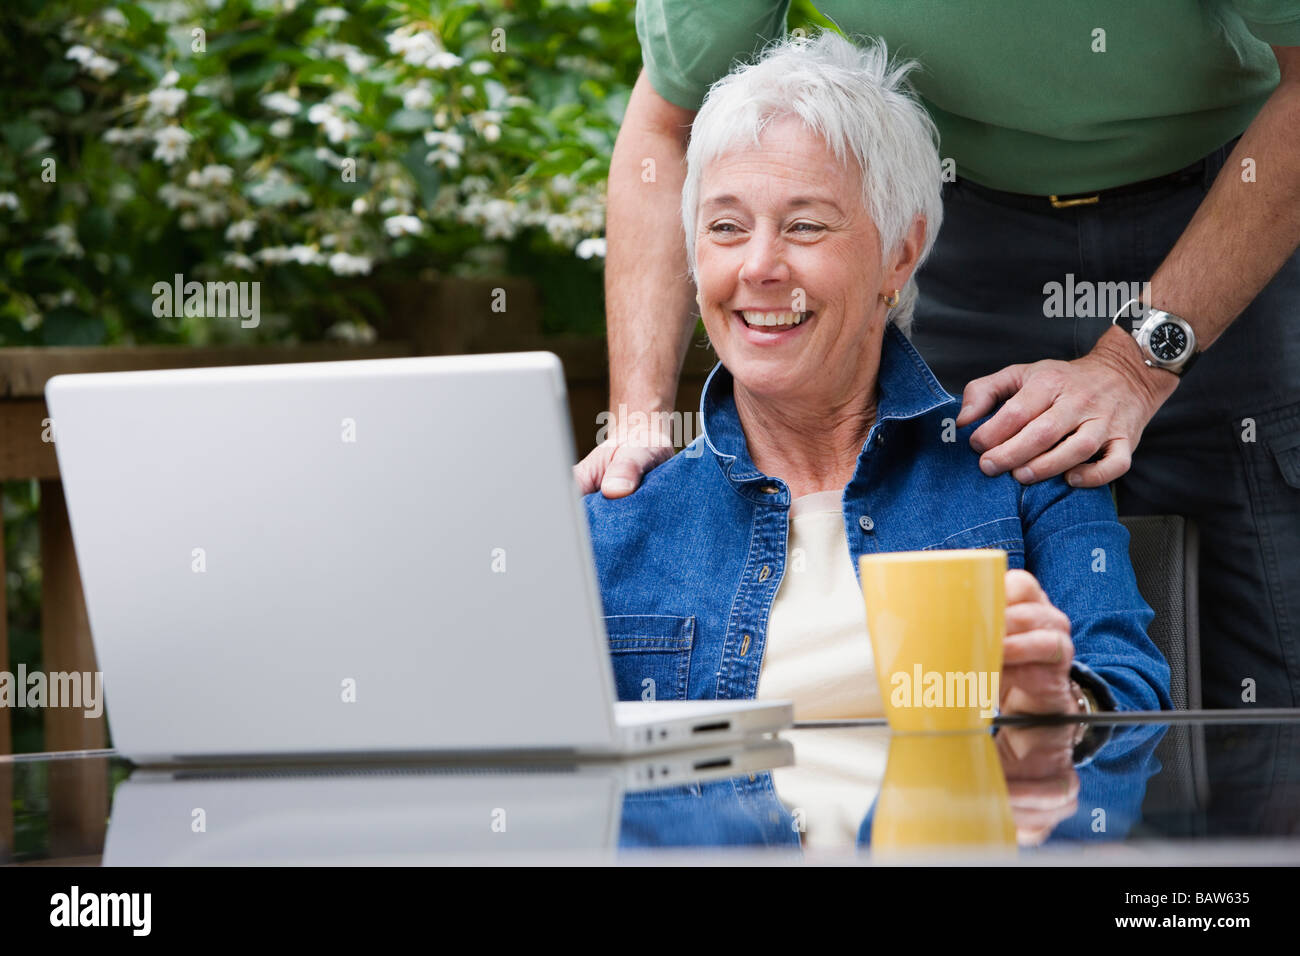 Senior couple looking at laptop outdoors Banque D'Images